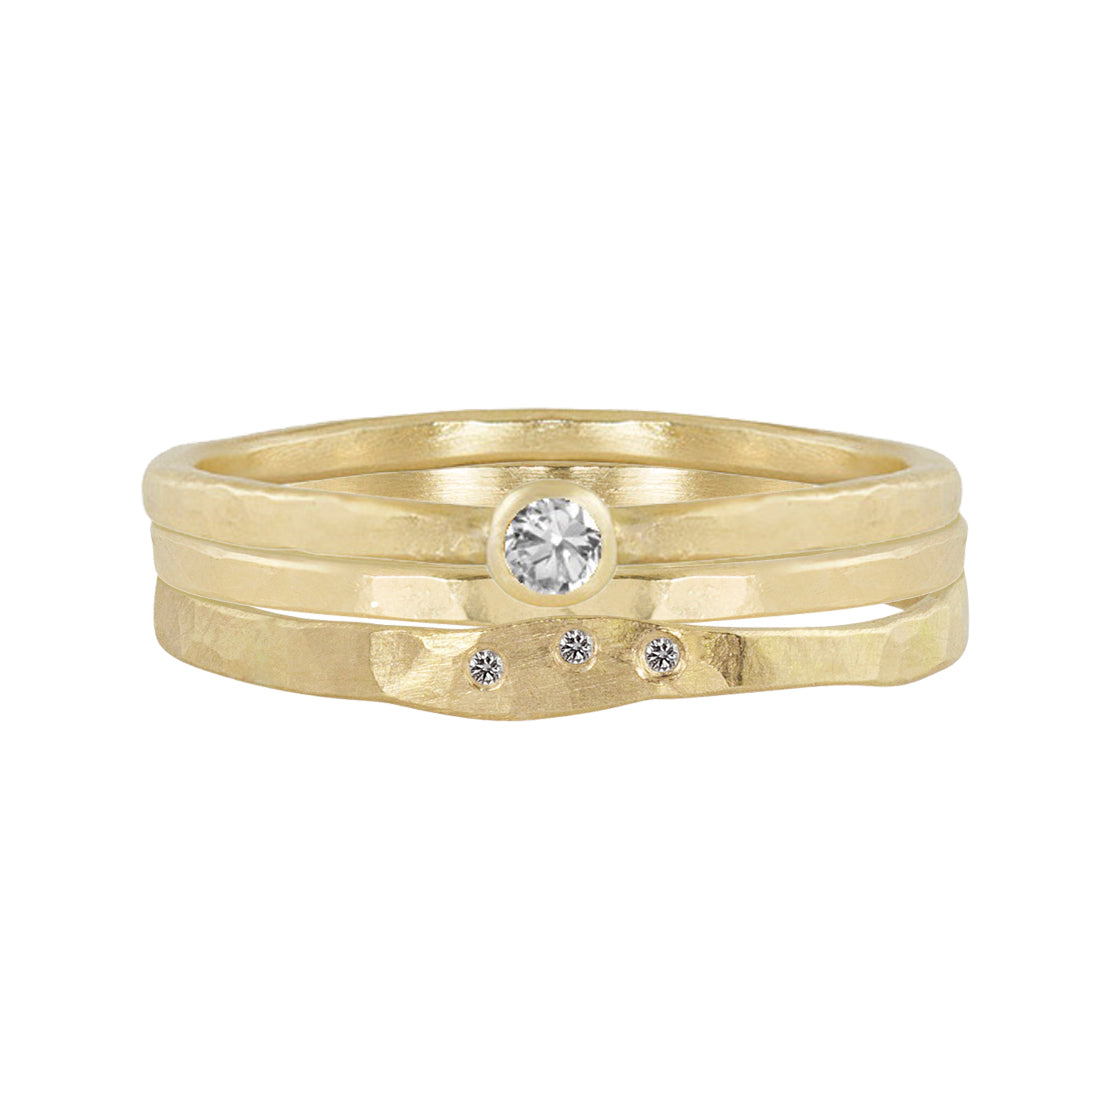 14k yellow gold RELA stacker ring with diamond with PREX and PRIM rings